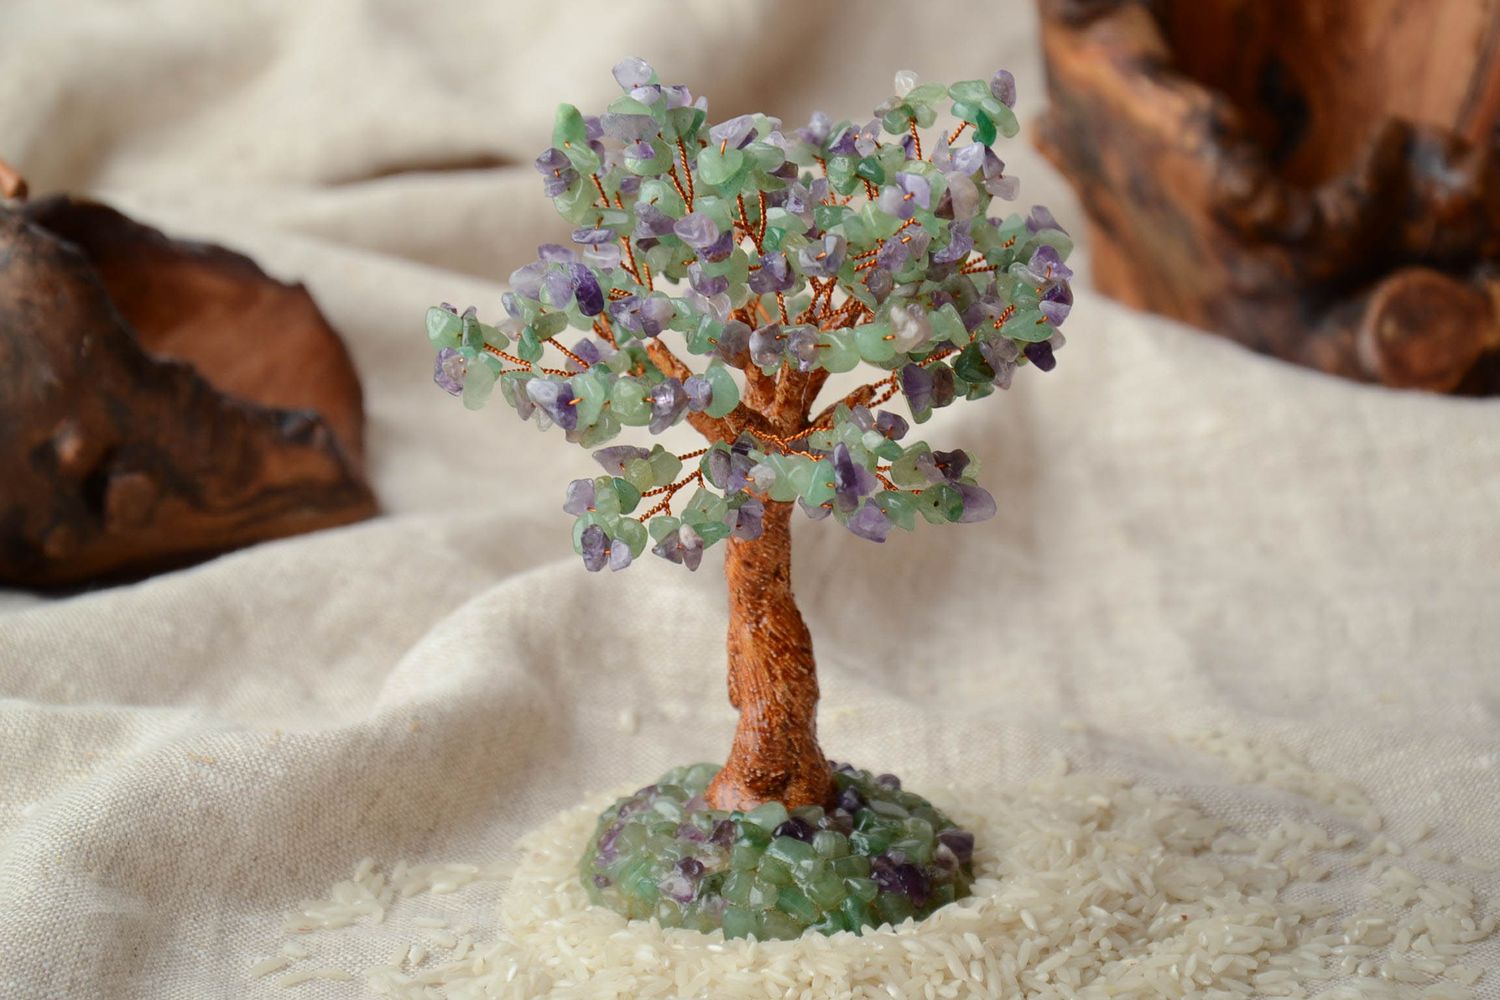 Decorative bonsai tree with natural amethyst and nephrite stones photo 1